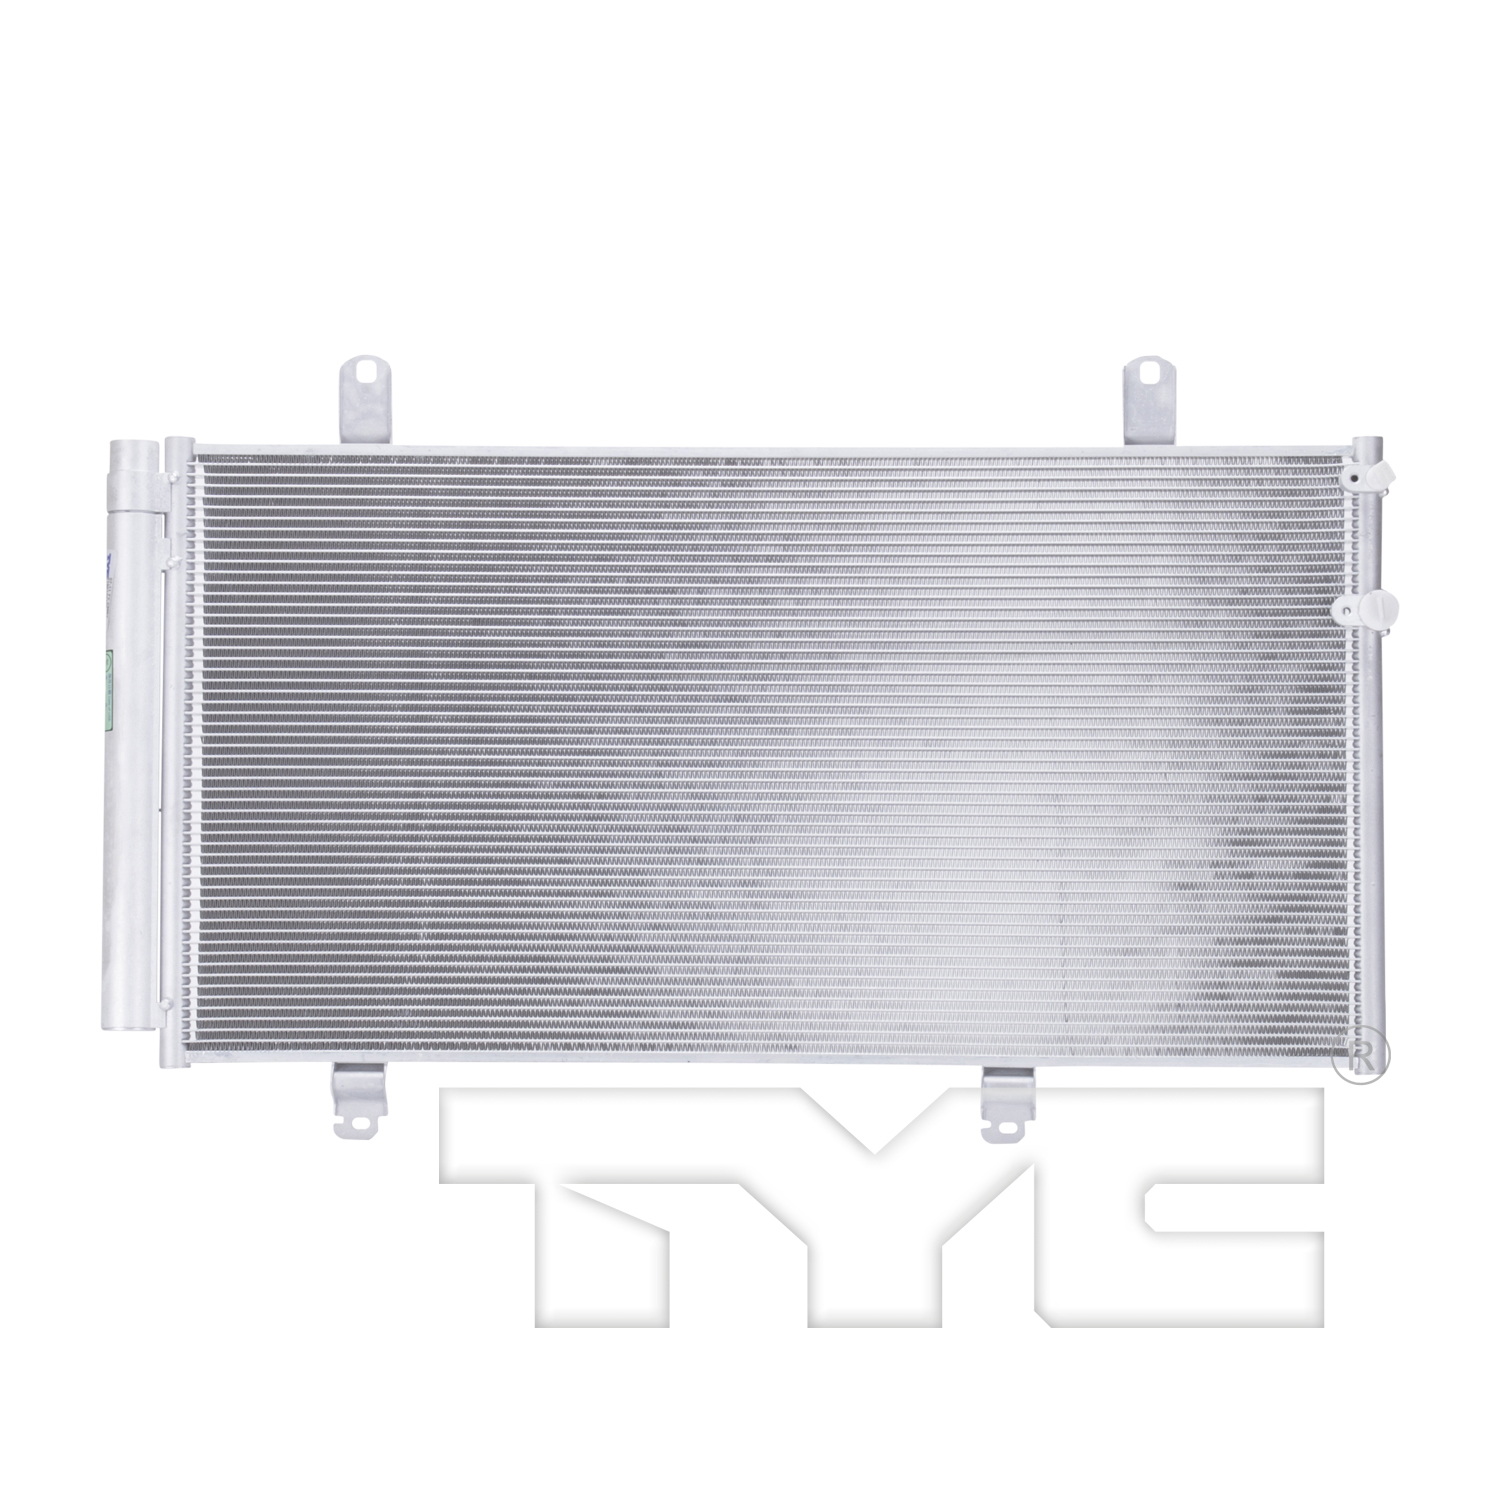 Aftermarket AC CONDENSERS for TOYOTA - VENZA, VENZA,09-16,Air conditioning condenser